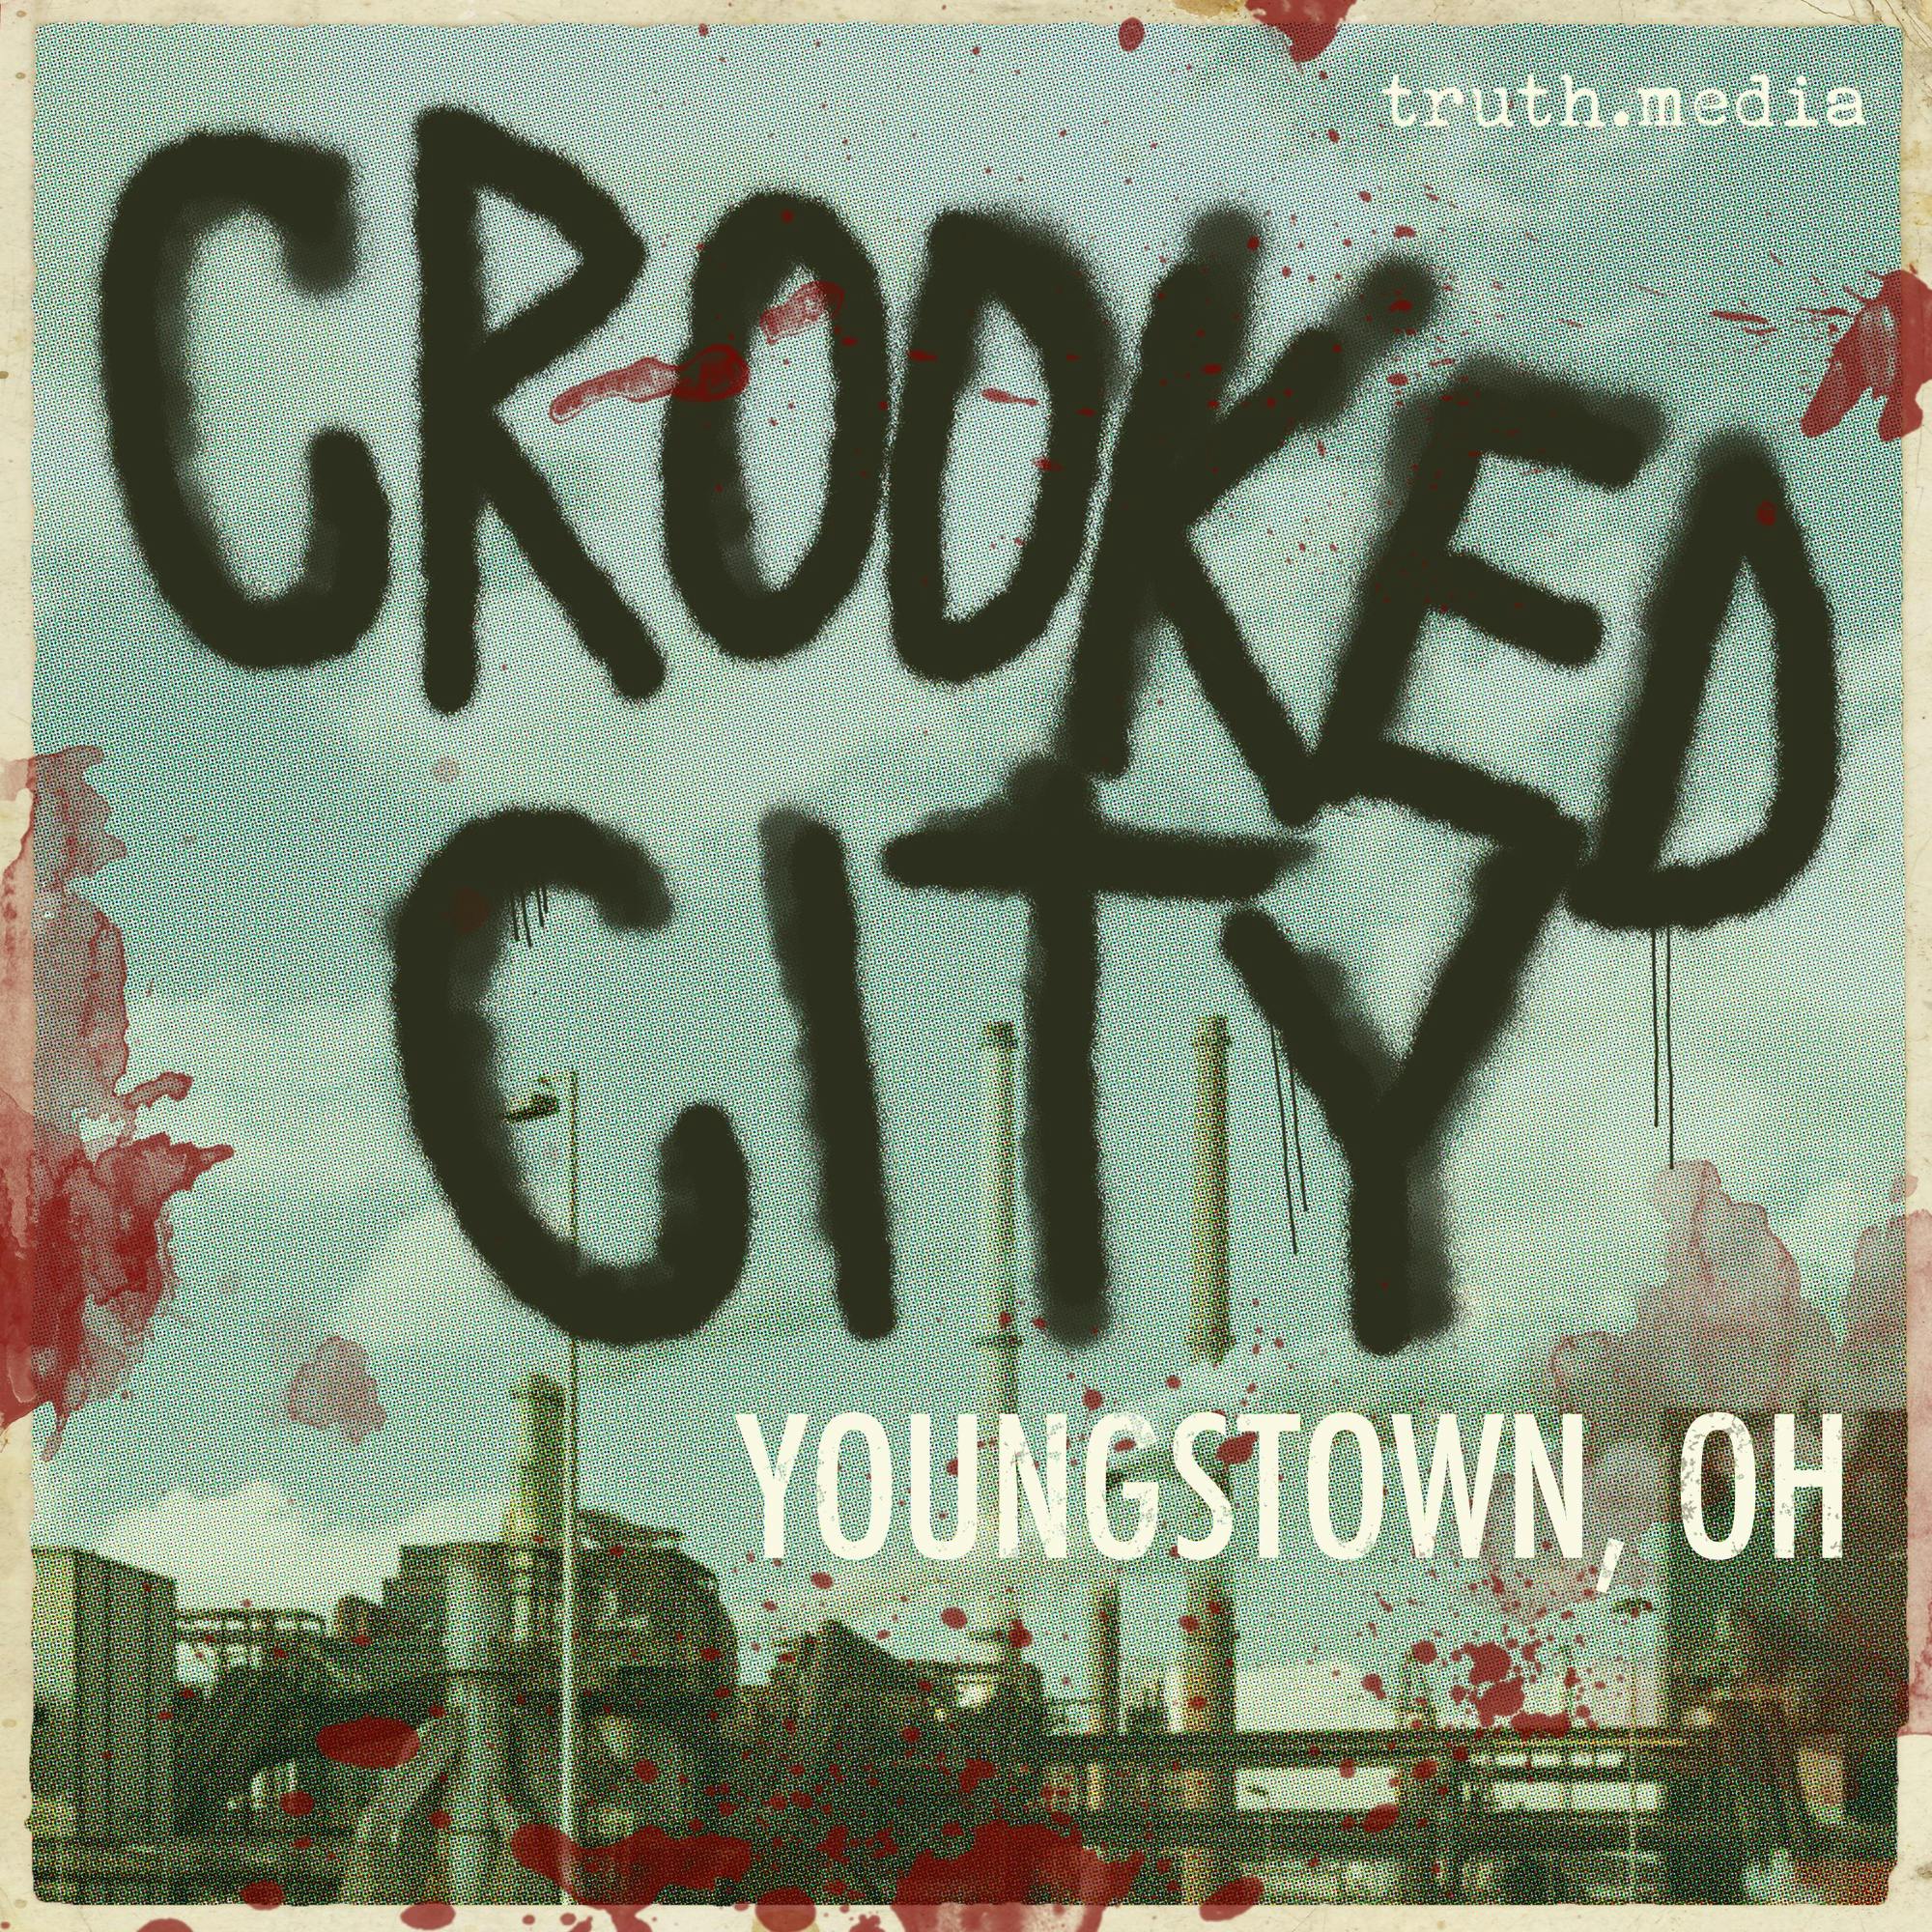 Introducing... Crooked City: Youngstown, OH